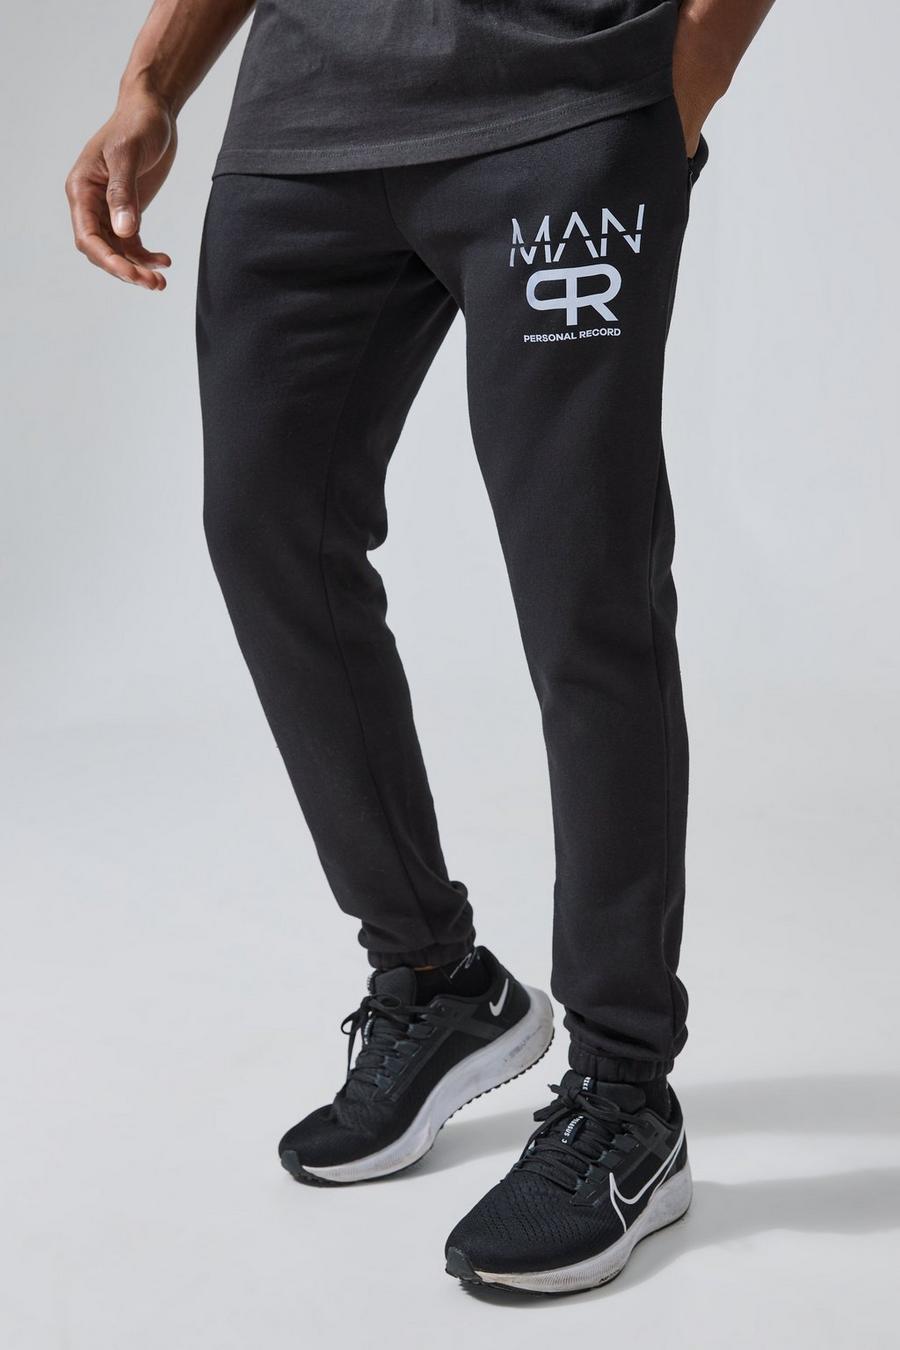 MAN Collection Joggers & Tracksuits For Men